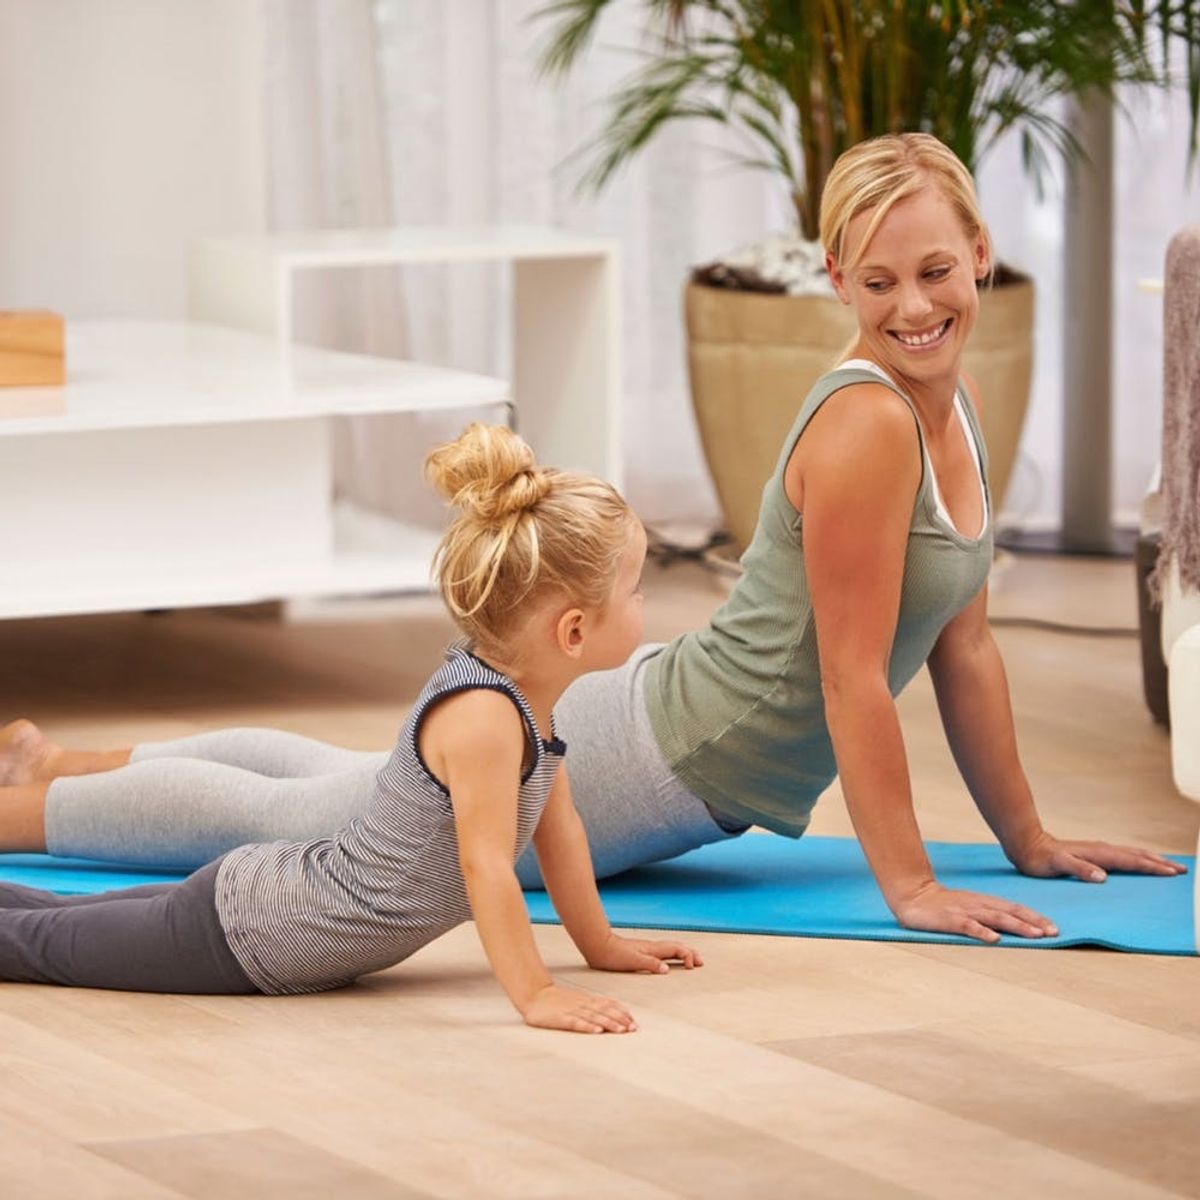 7 YouTube Workouts You Can Do With Your Kids